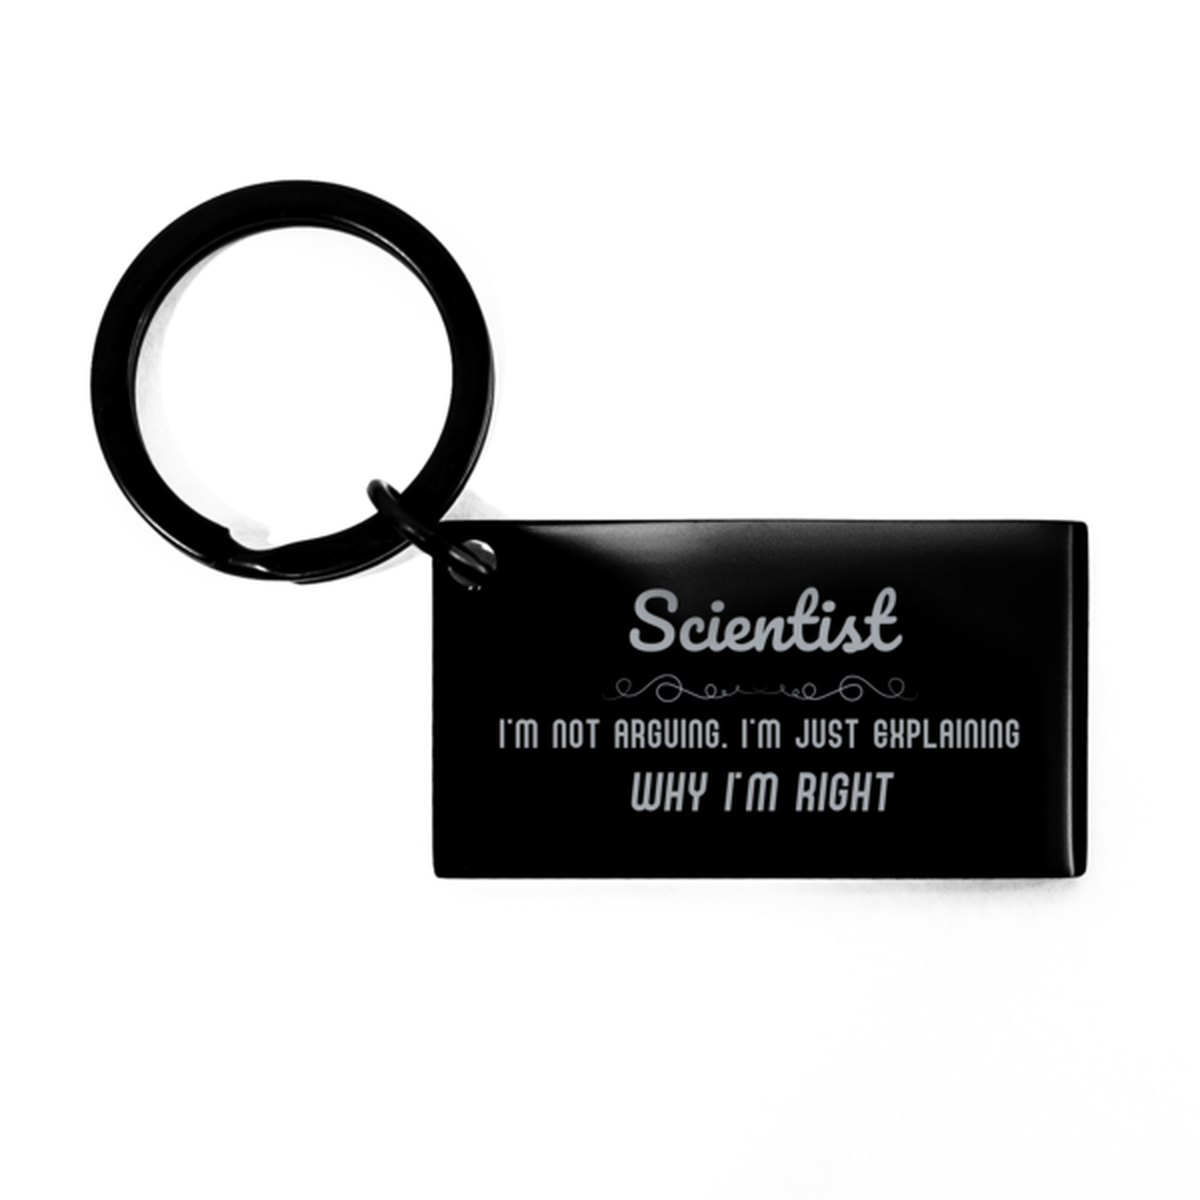 Scientist I'm not Arguing. I'm Just Explaining Why I'm RIGHT Keychain, Funny Saying Quote Scientist Gifts For Scientist Graduation Birthday Christmas Gifts for Men Women Coworker